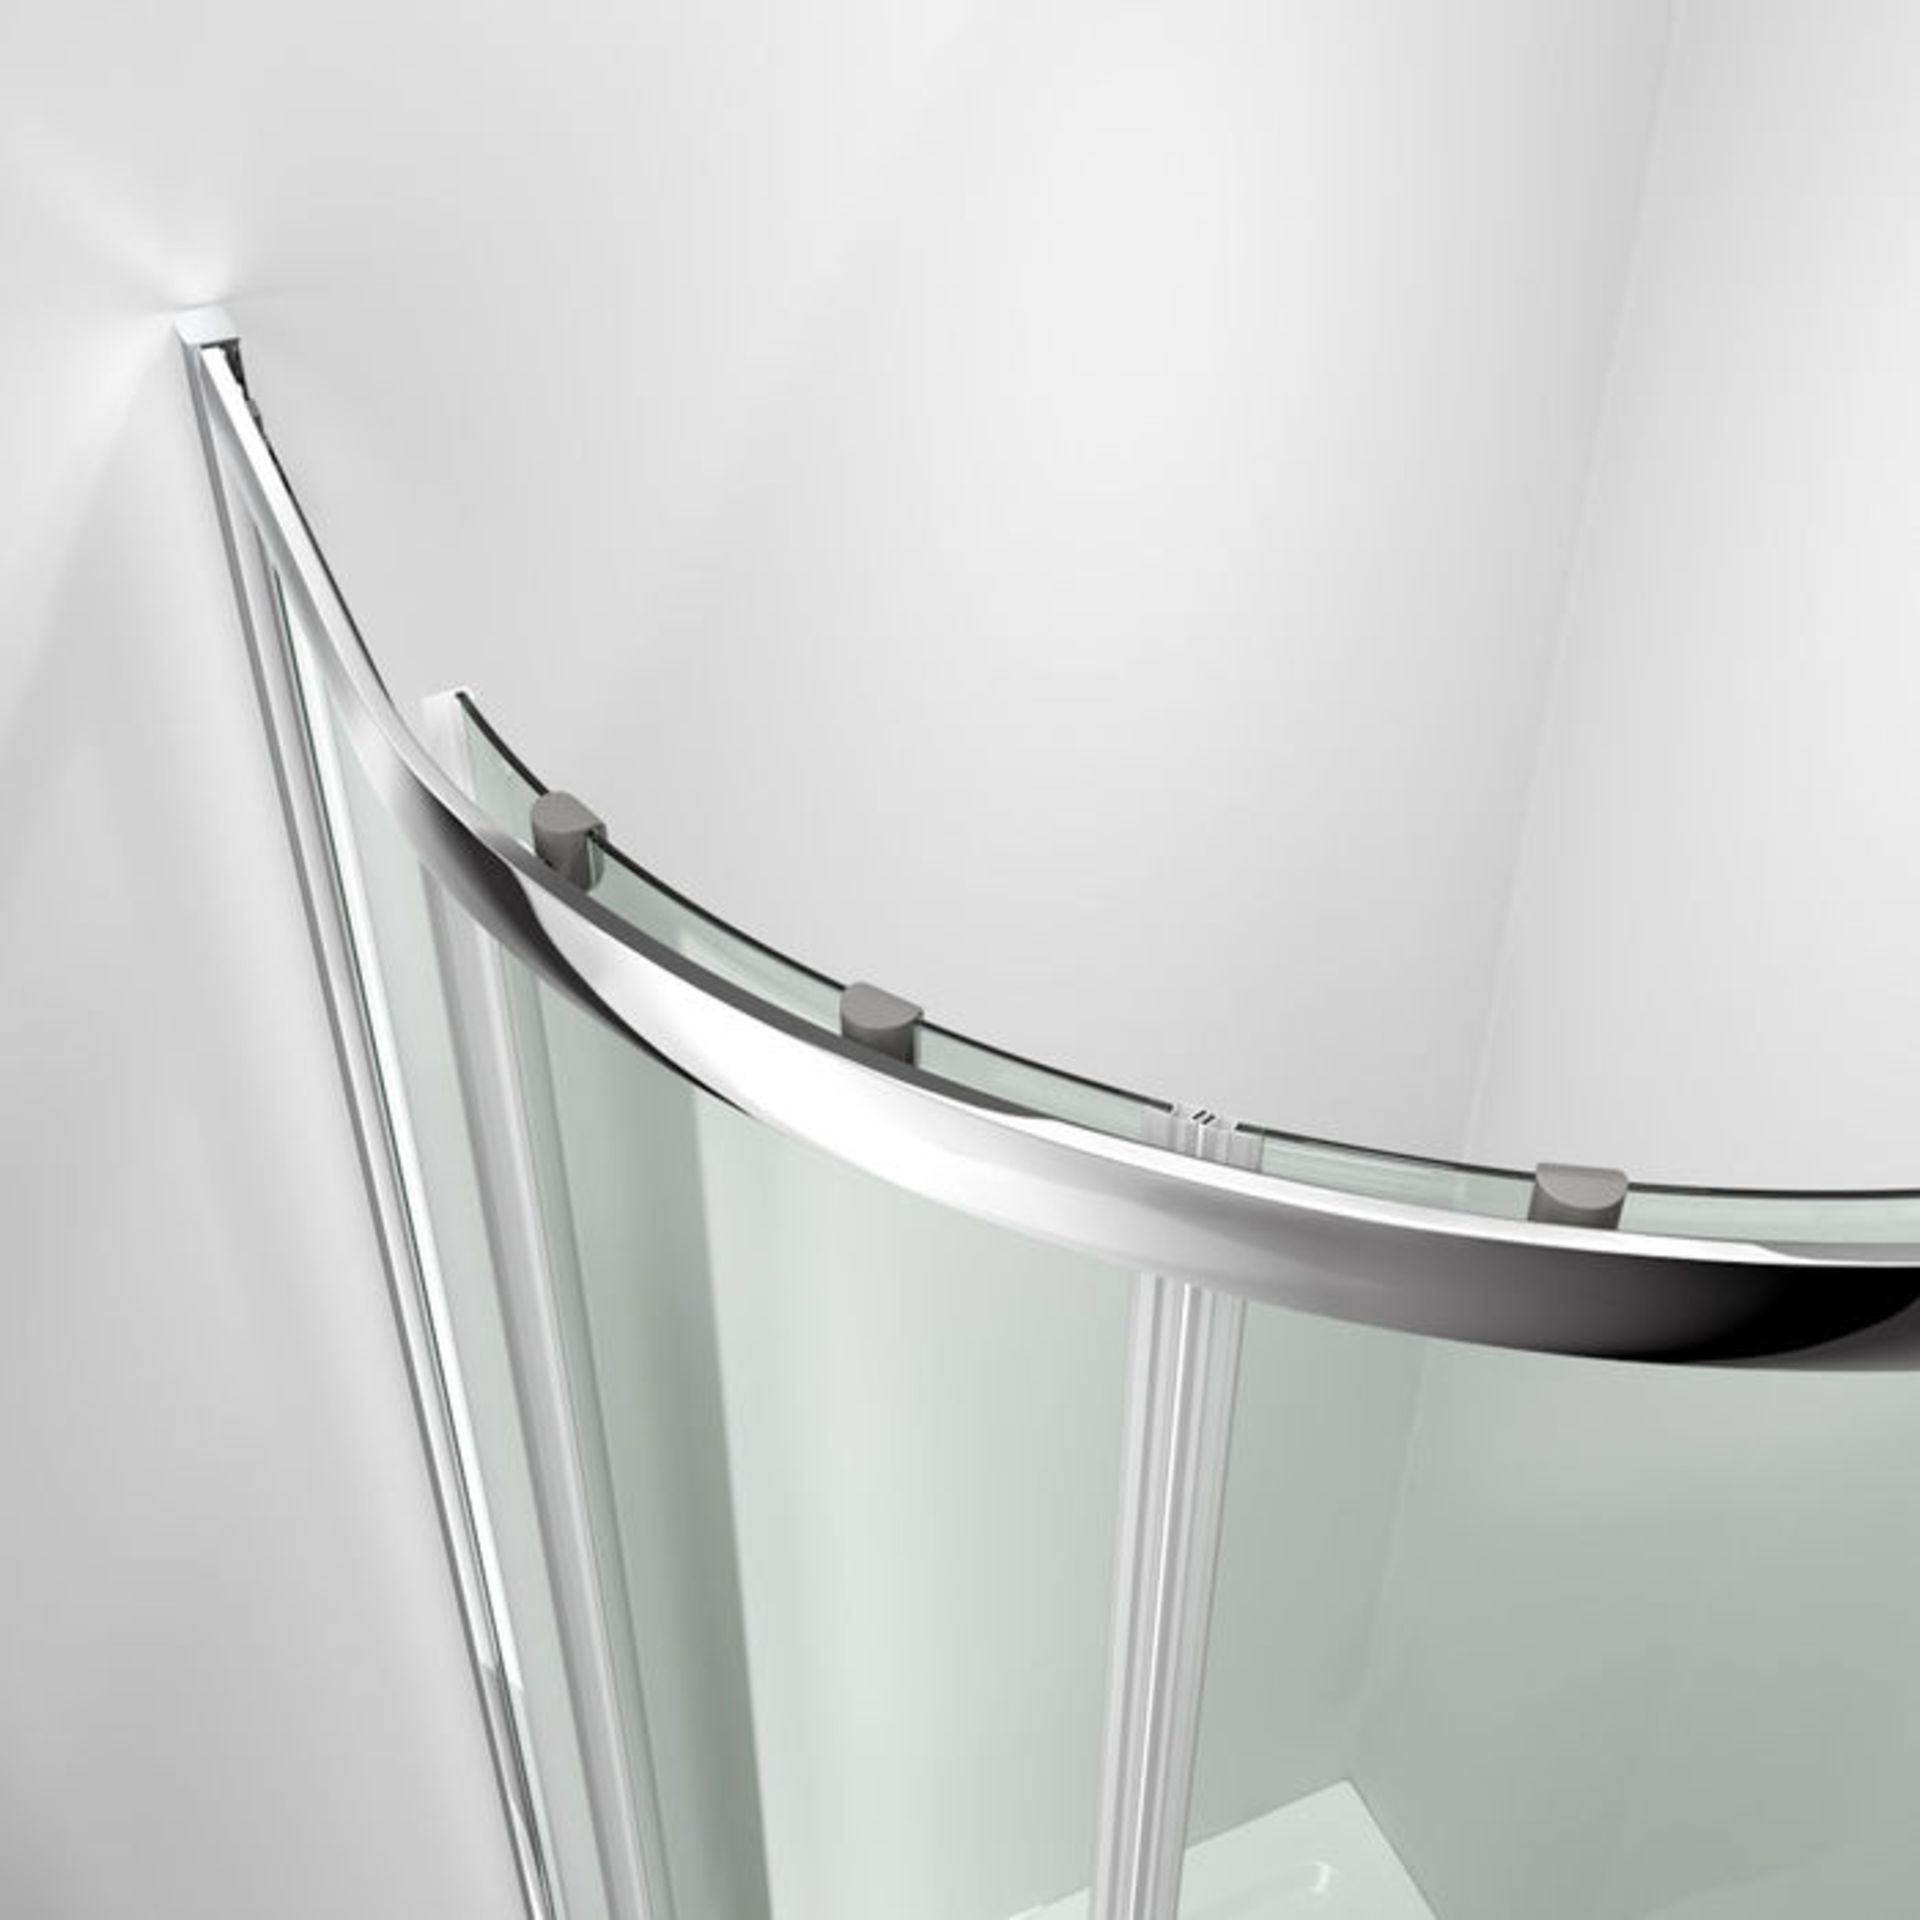 (G44) 800x800mm - Elements Quadrant Shower Enclosure RRP £199.99 4mm Safety Glass Fully waterproof - Image 6 of 6